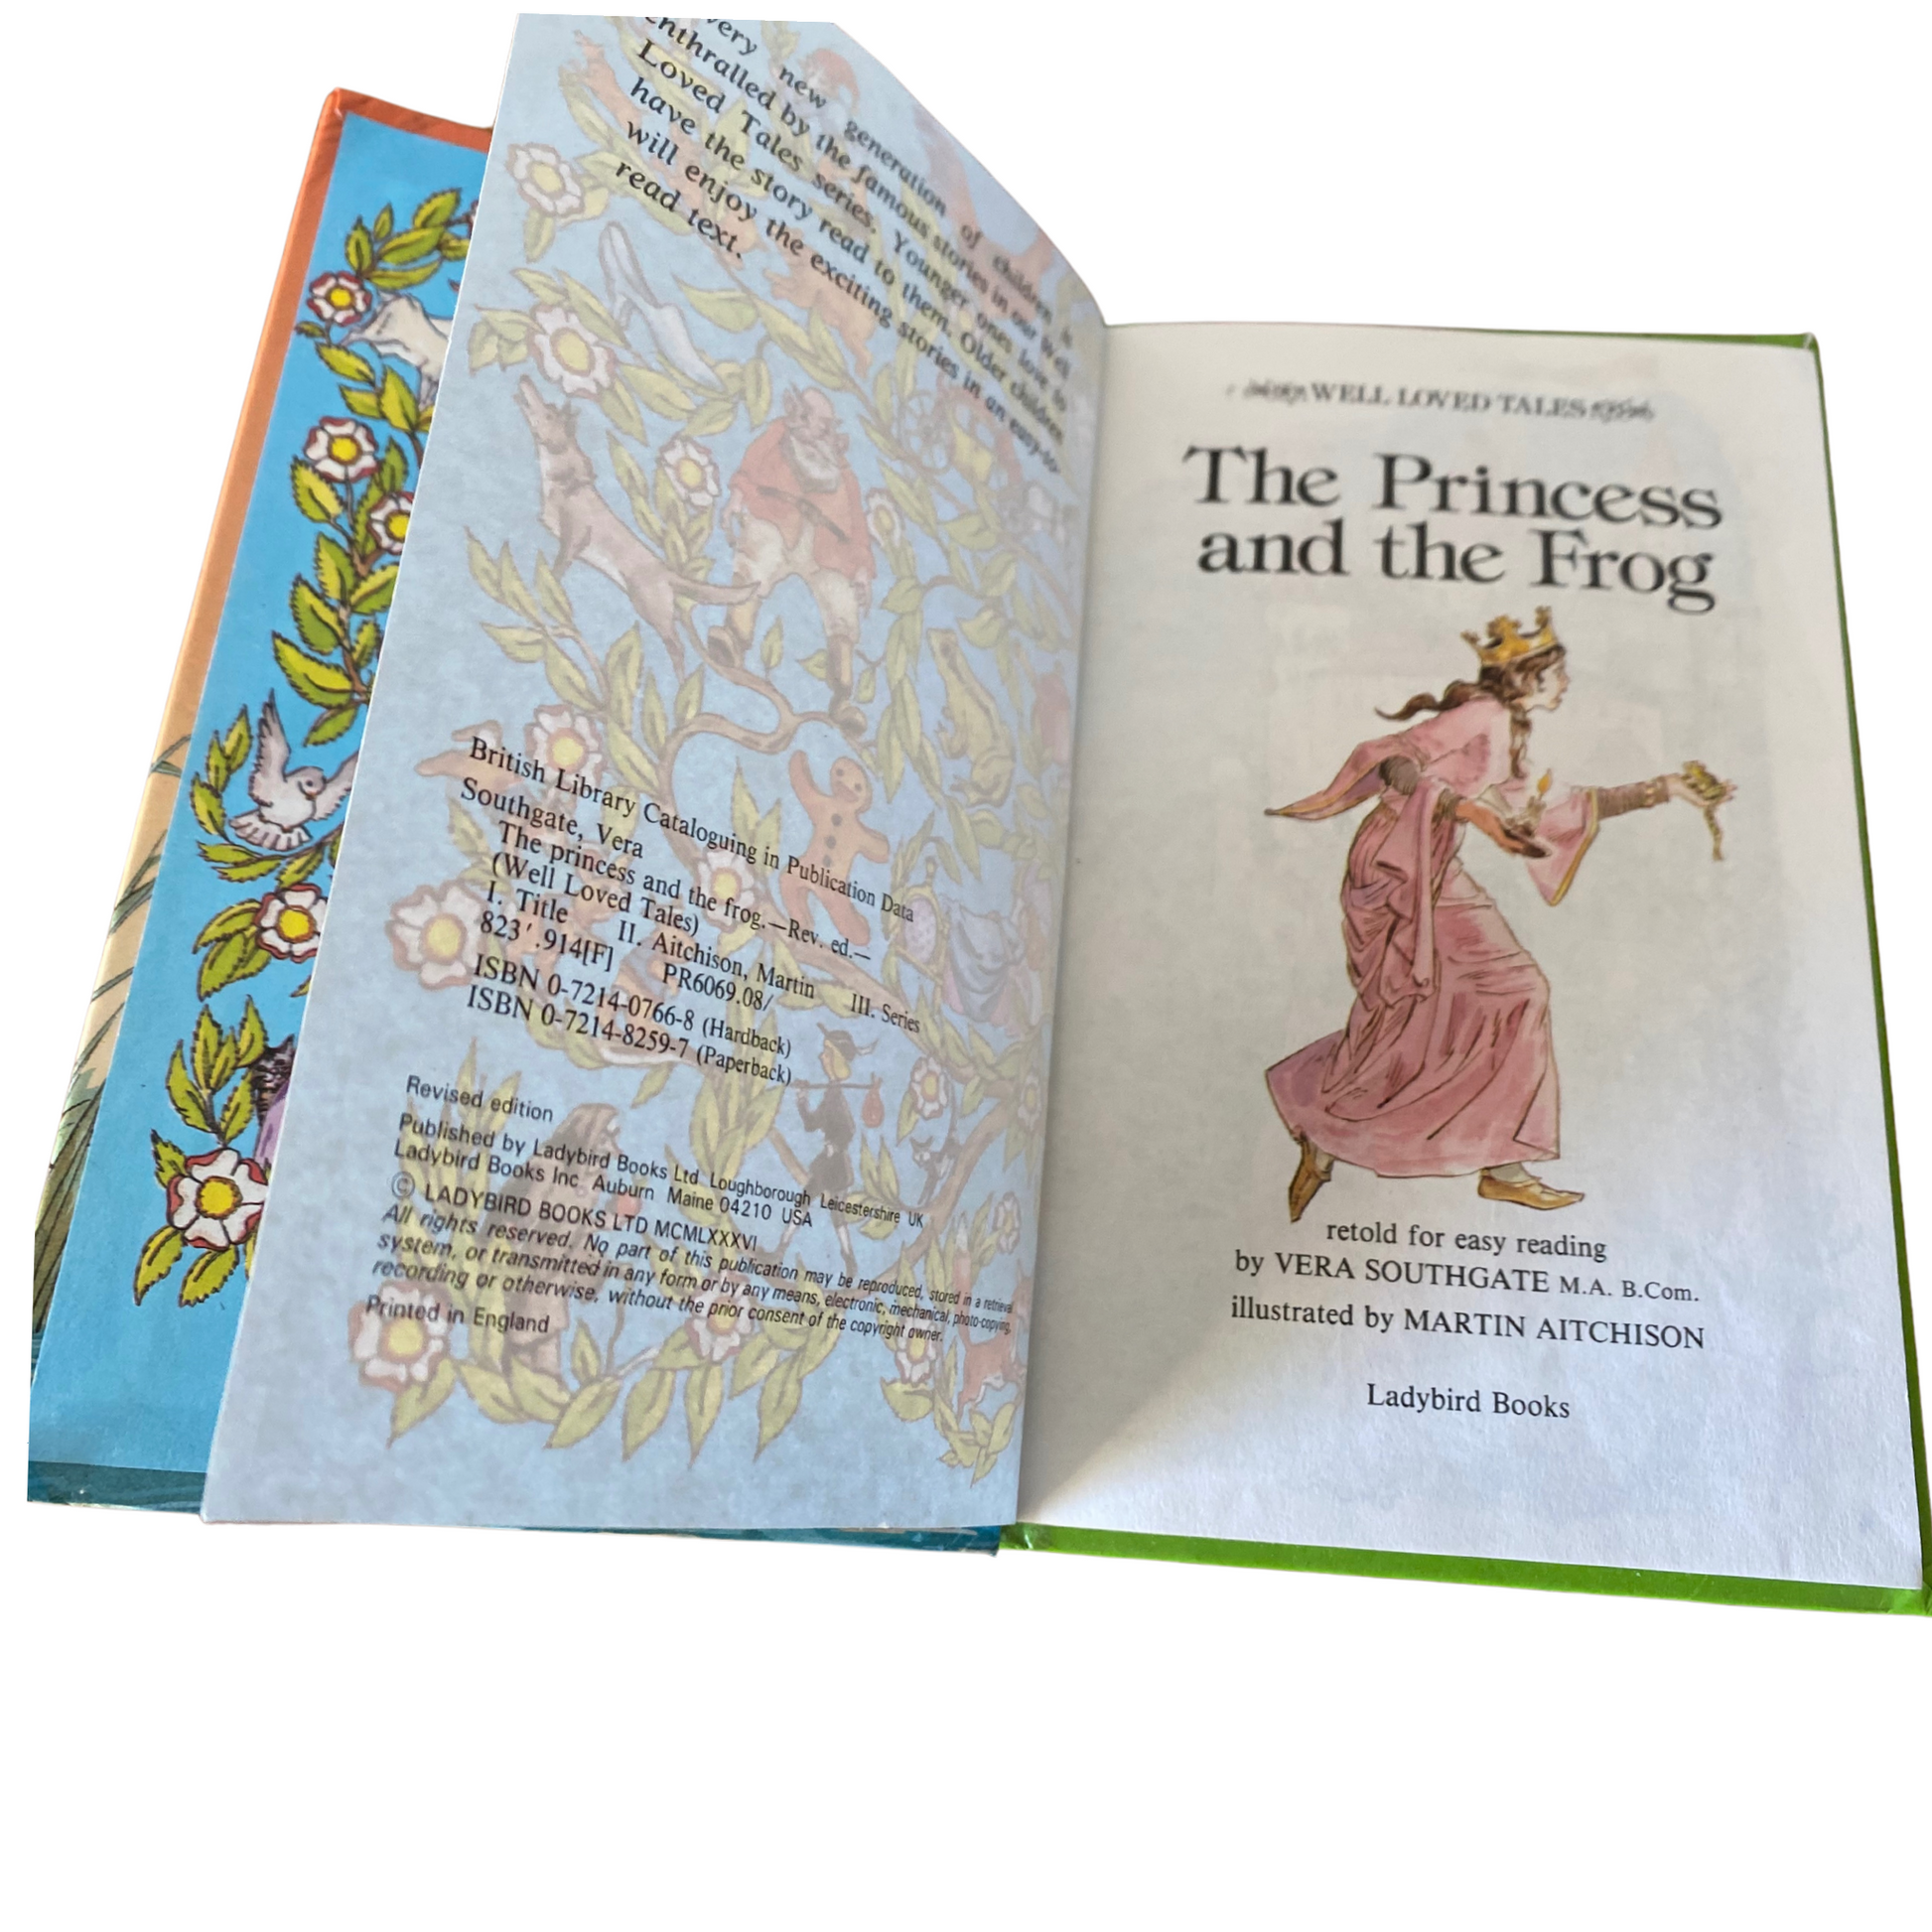 Easy reading edition -  The Princess and the Frog  retold by Vera Southgate , illustrated by Martin Aitchinson